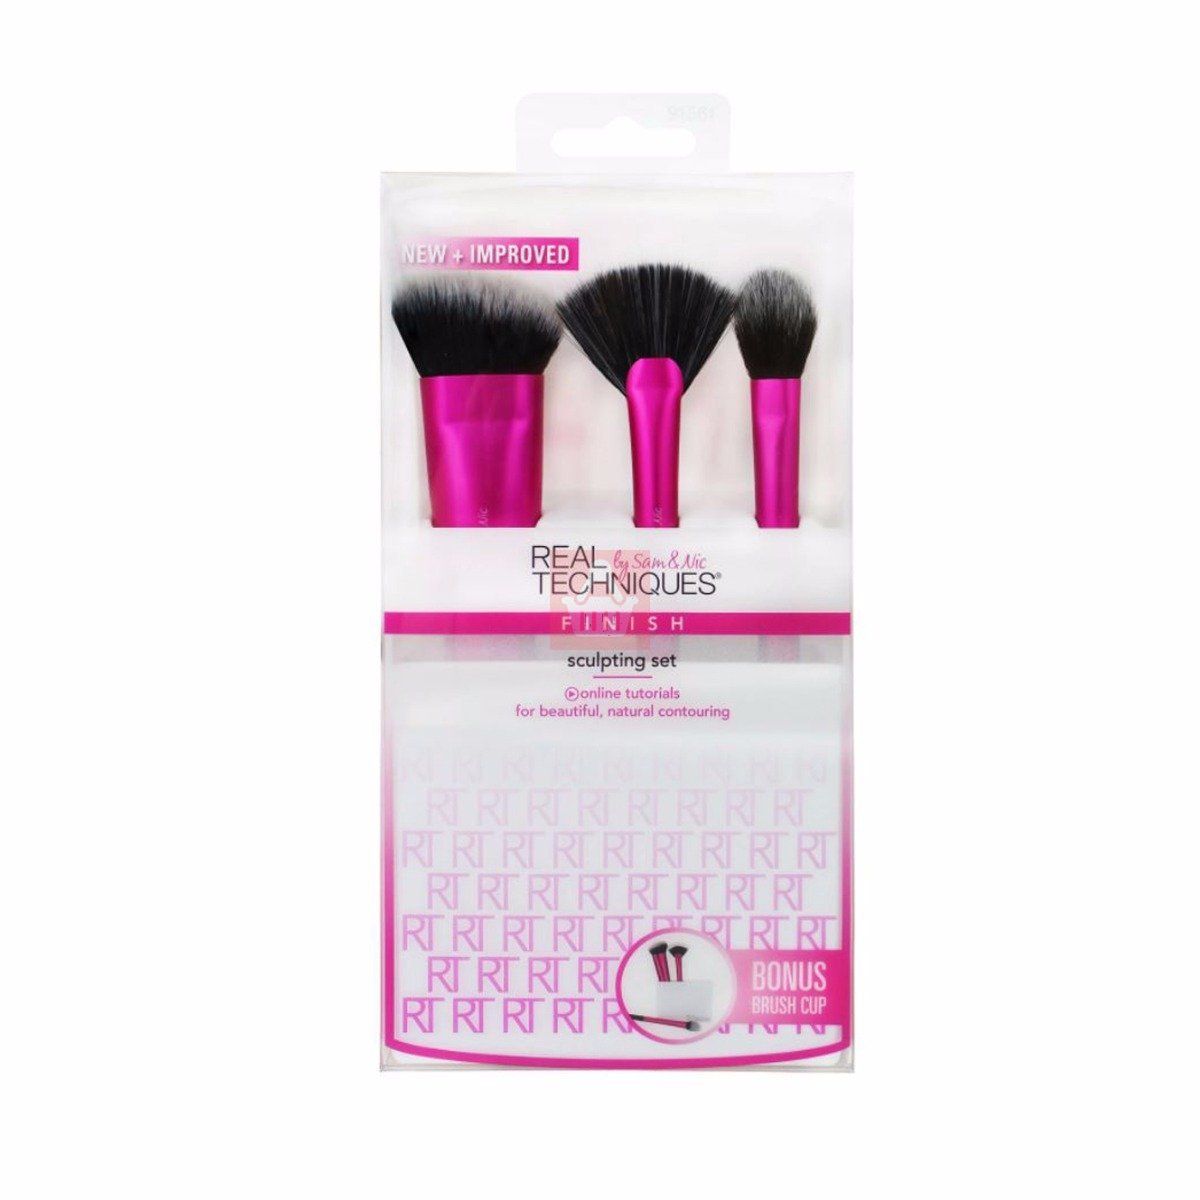 Real Techniques Sculpting Makeup Brush Set for Contouring and Highlighting (Packaging and Handle Colour May Vary)